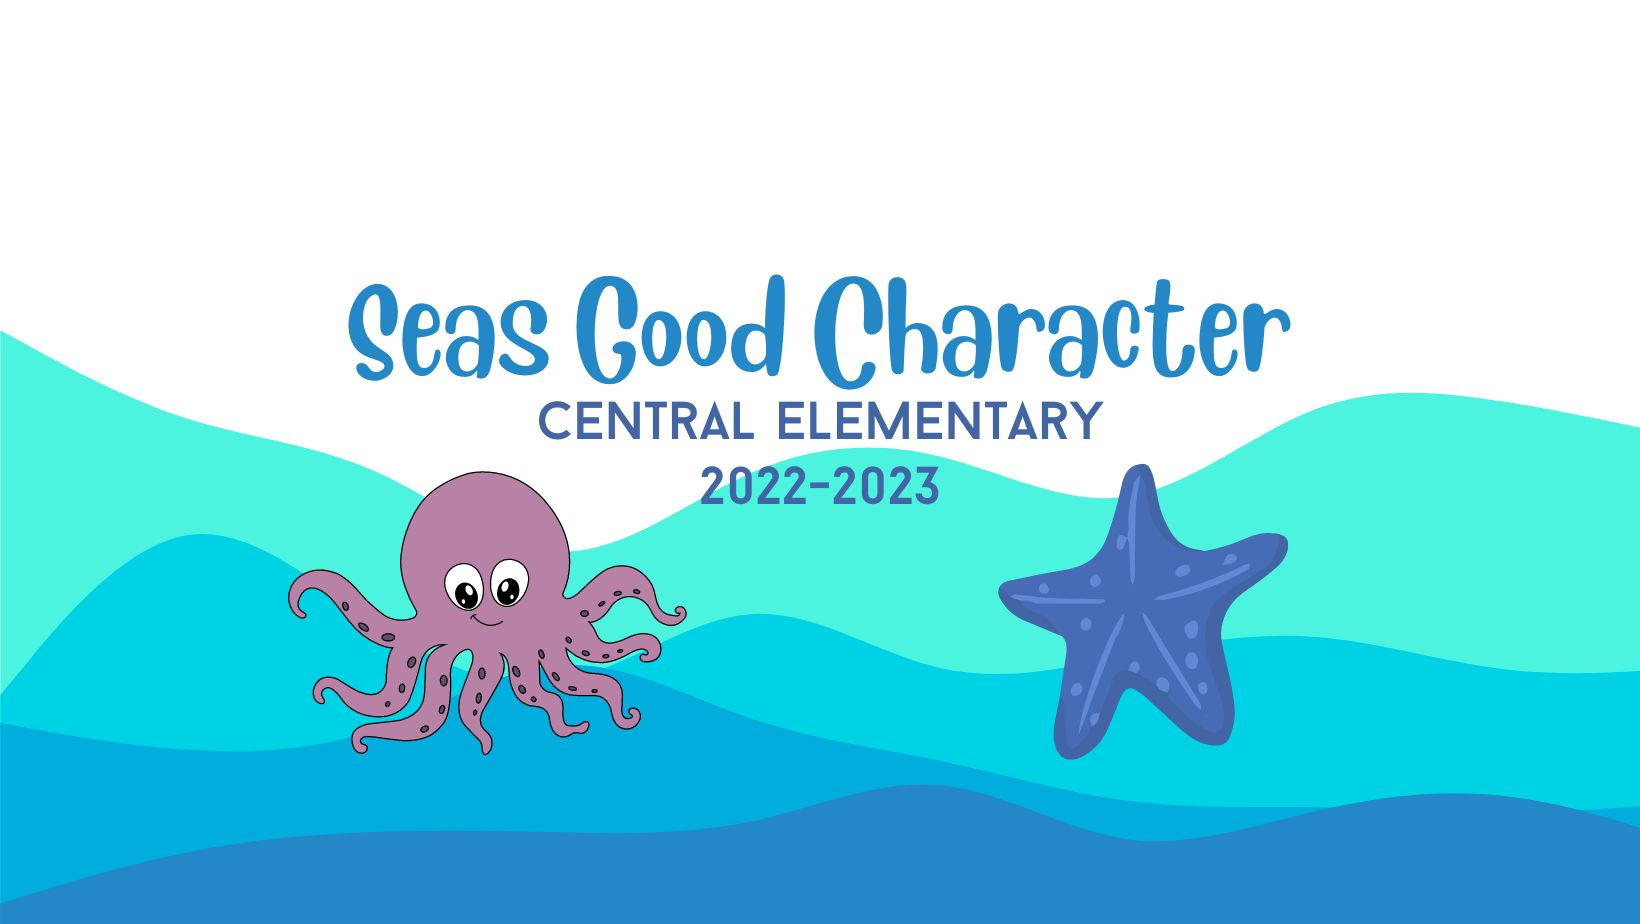 Seas Good Character Central Elementary 2022-2023